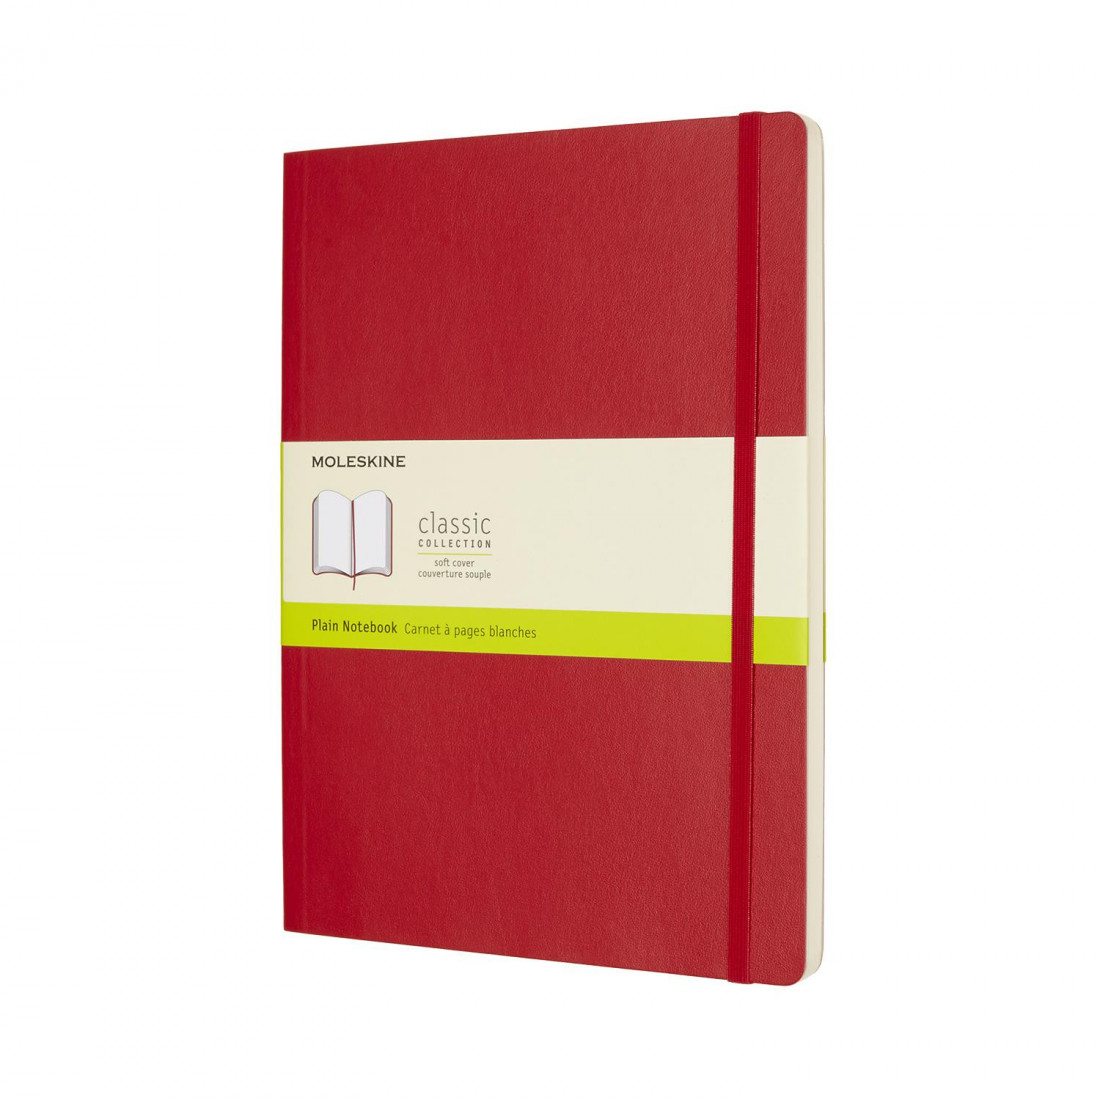 Notebook Extra Large 19x25 Plain Scarlet Red Soft Cover Moleskine